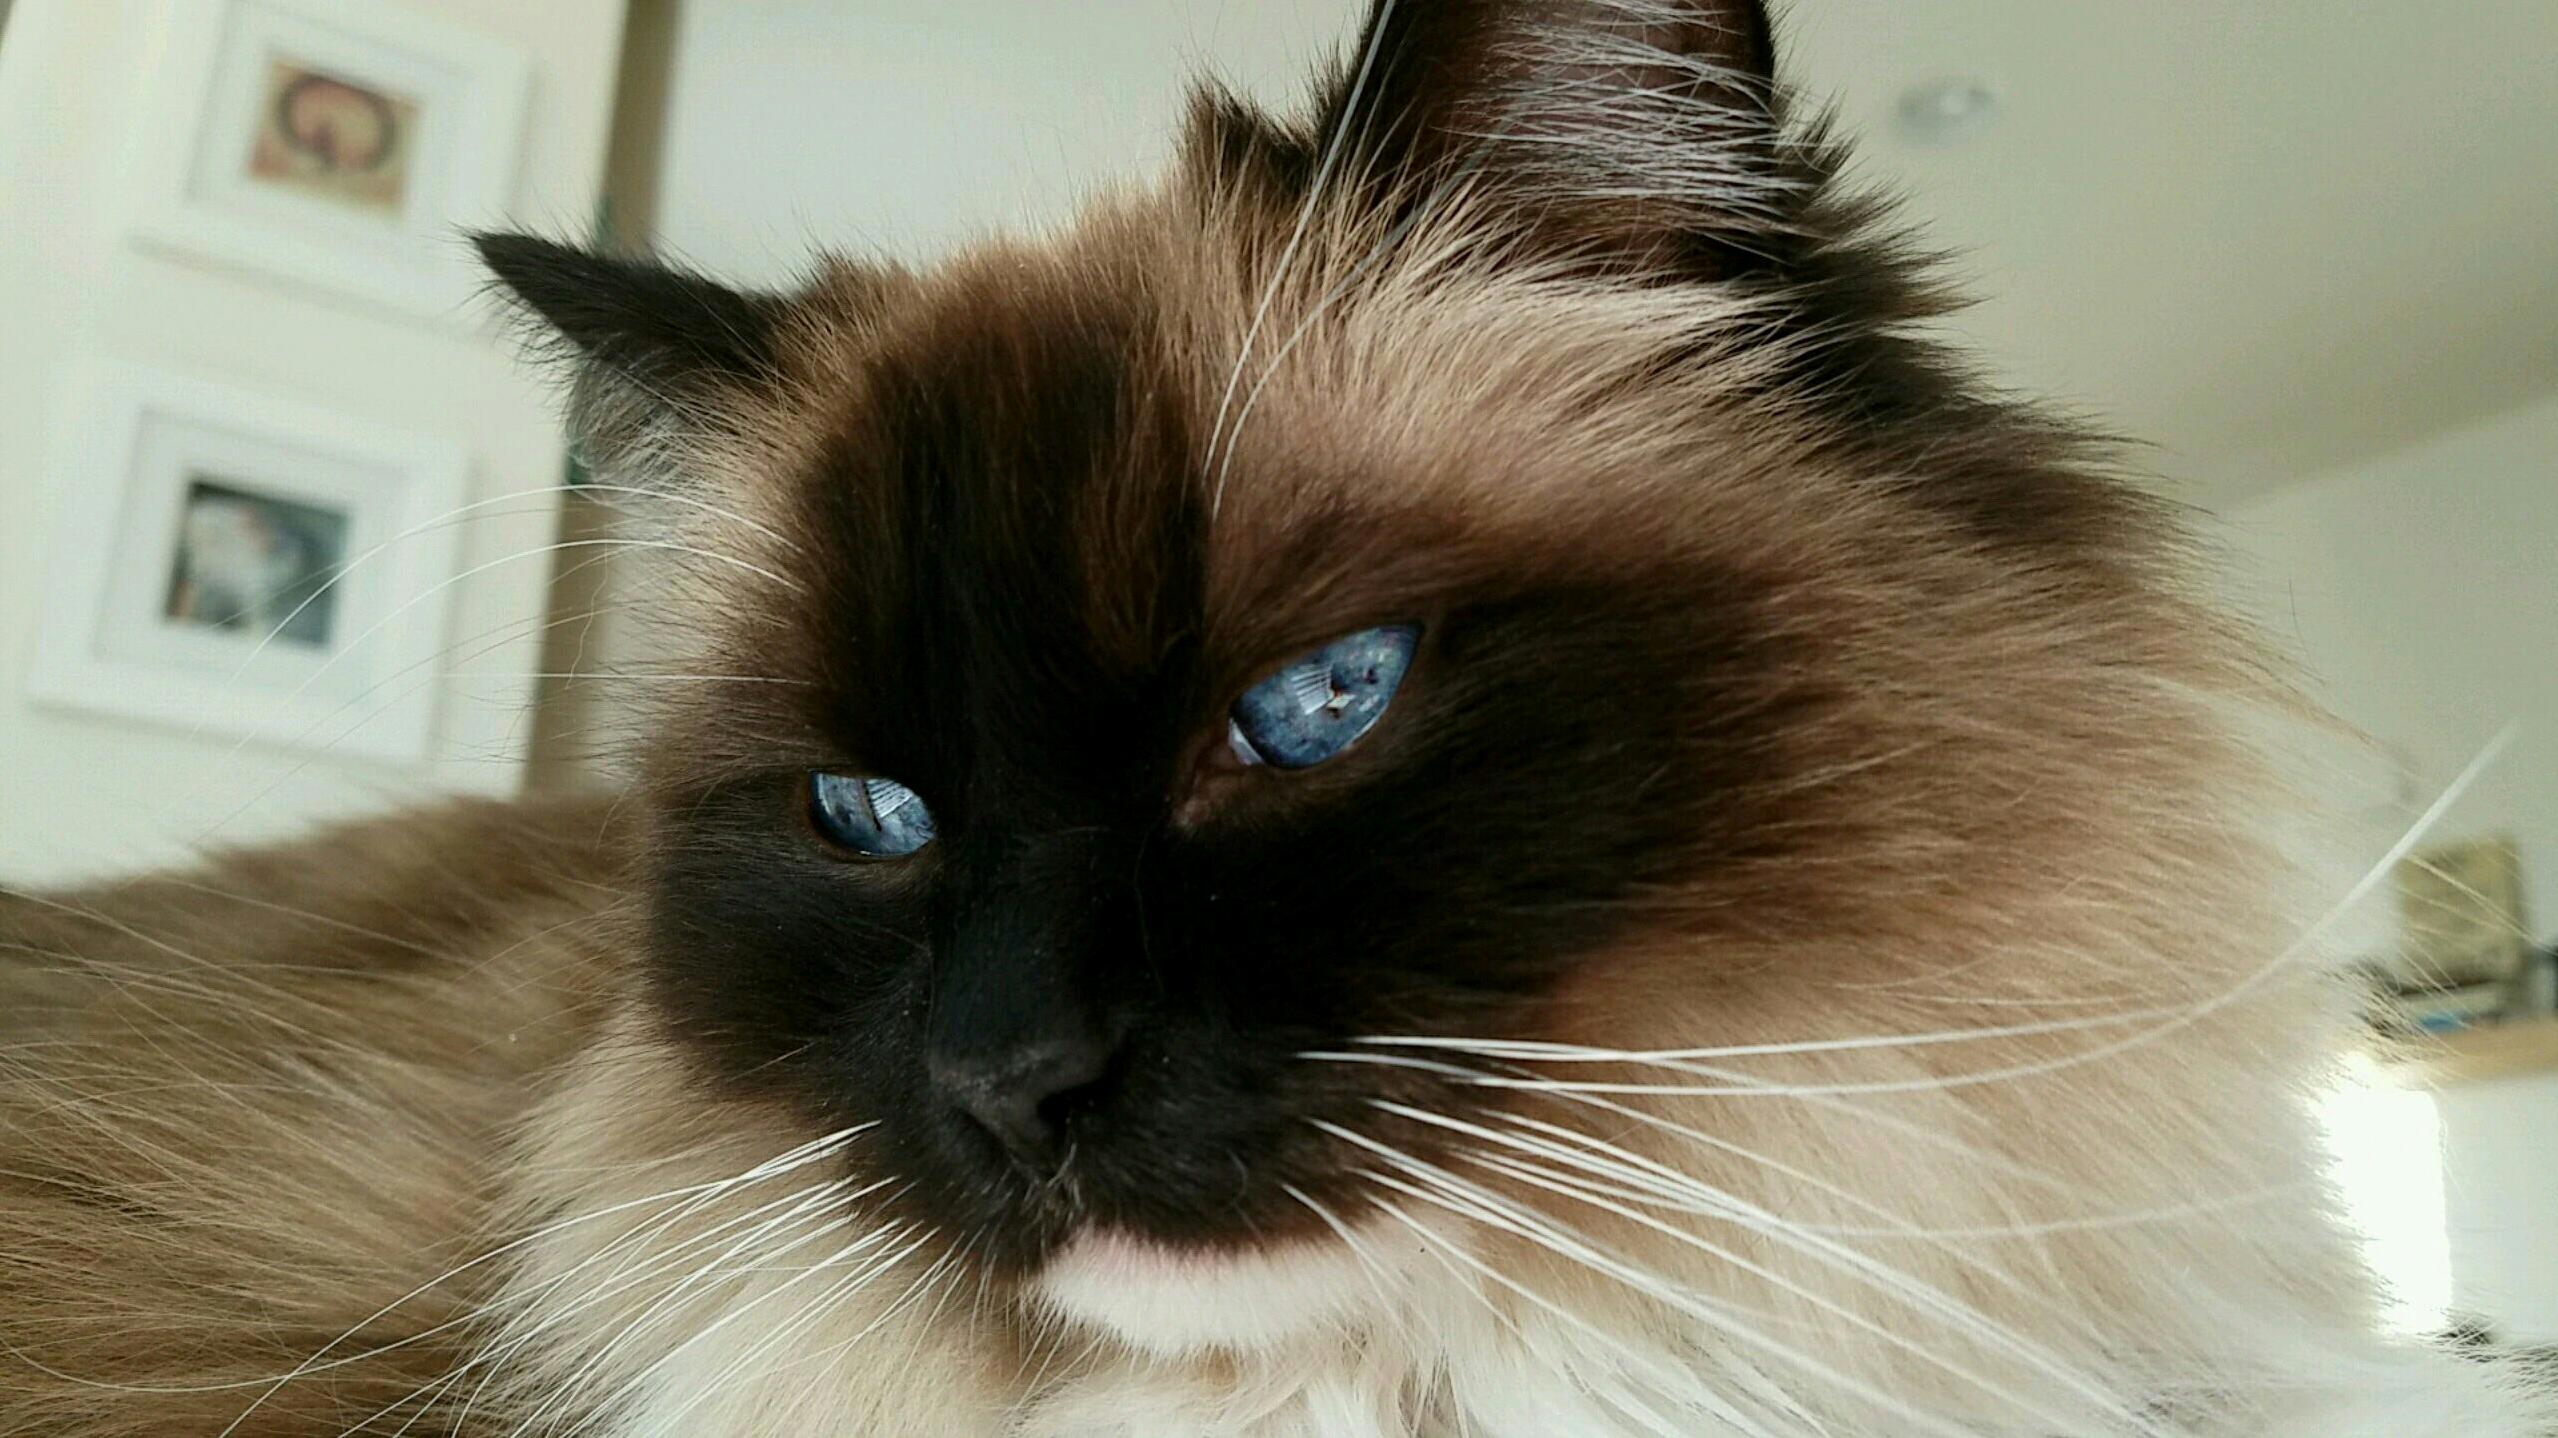 In love with her eyes – lexi the 8 year old rag doll